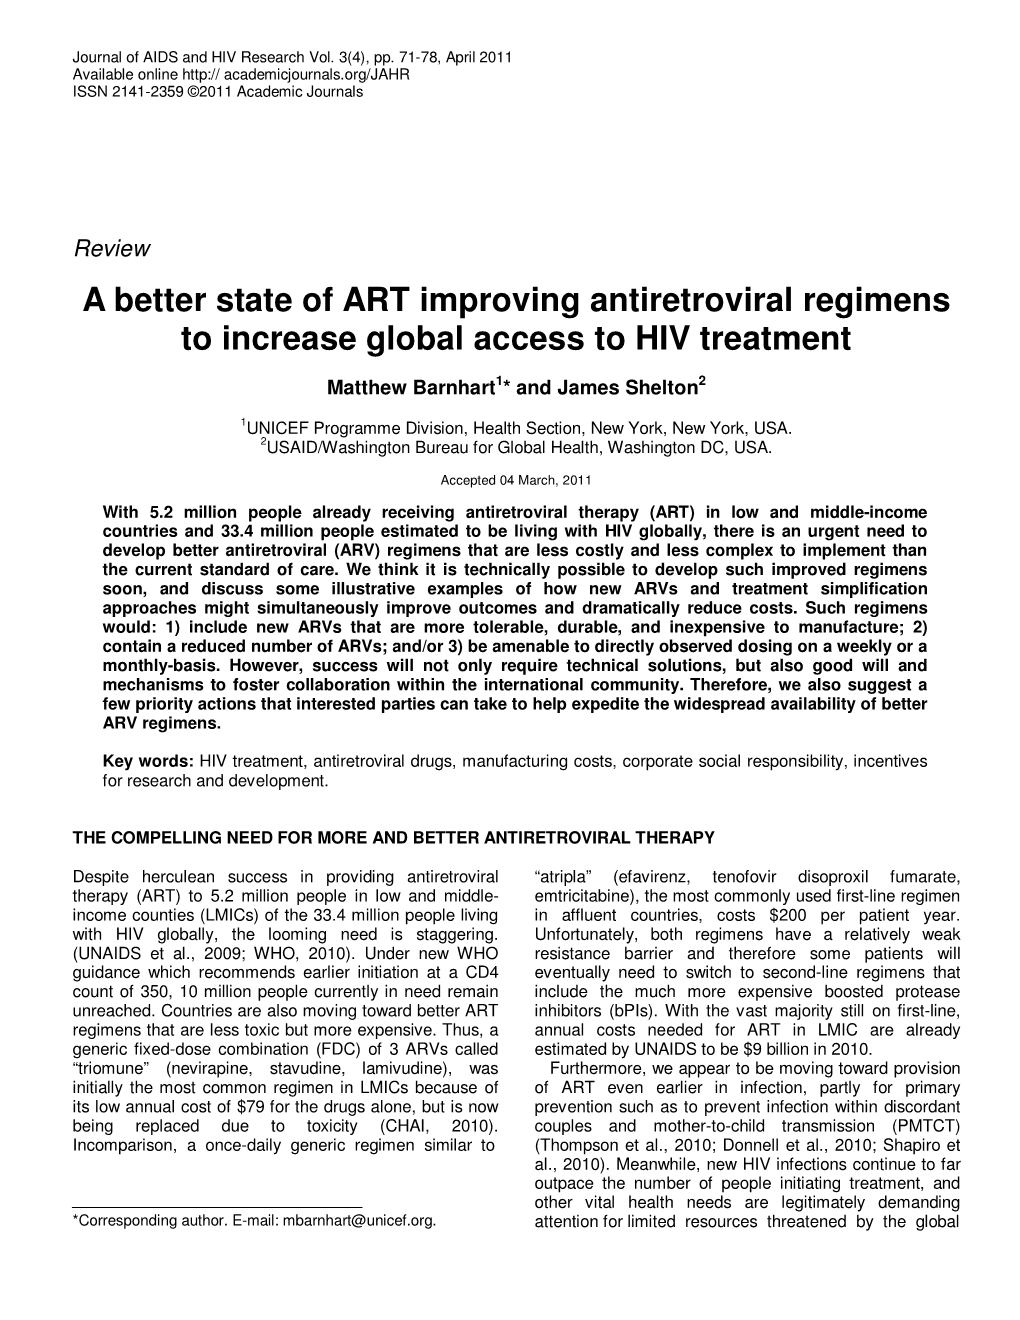 A Better State of ART Improving Antiretroviral Regimens to Increase Global Access to HIV Treatment